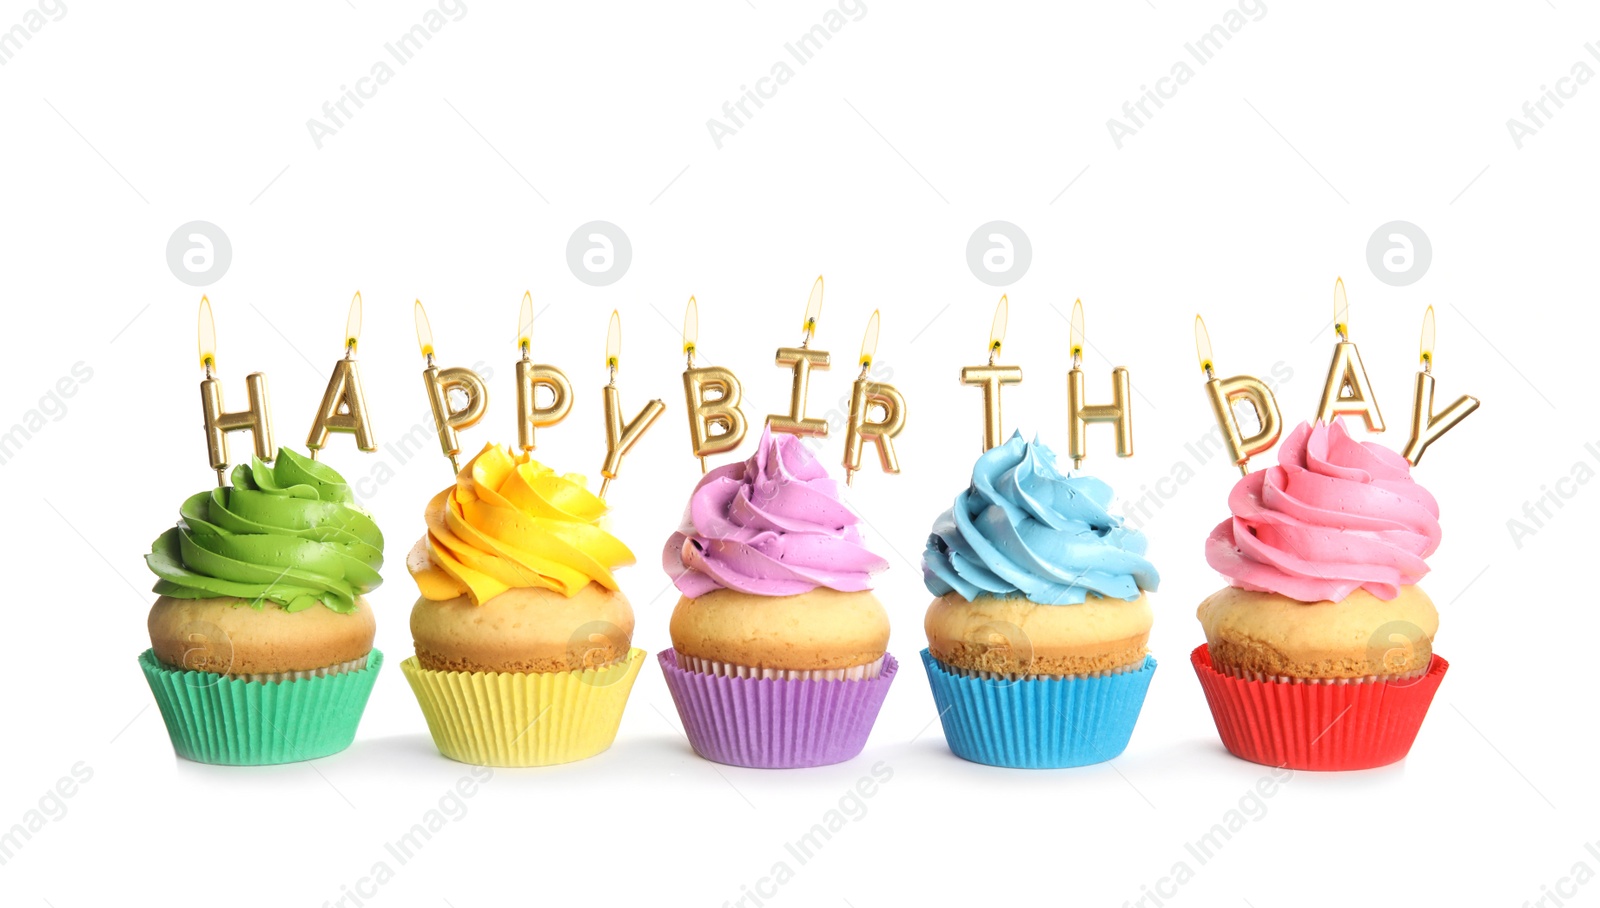 Photo of Birthday cupcakes with candles on white background